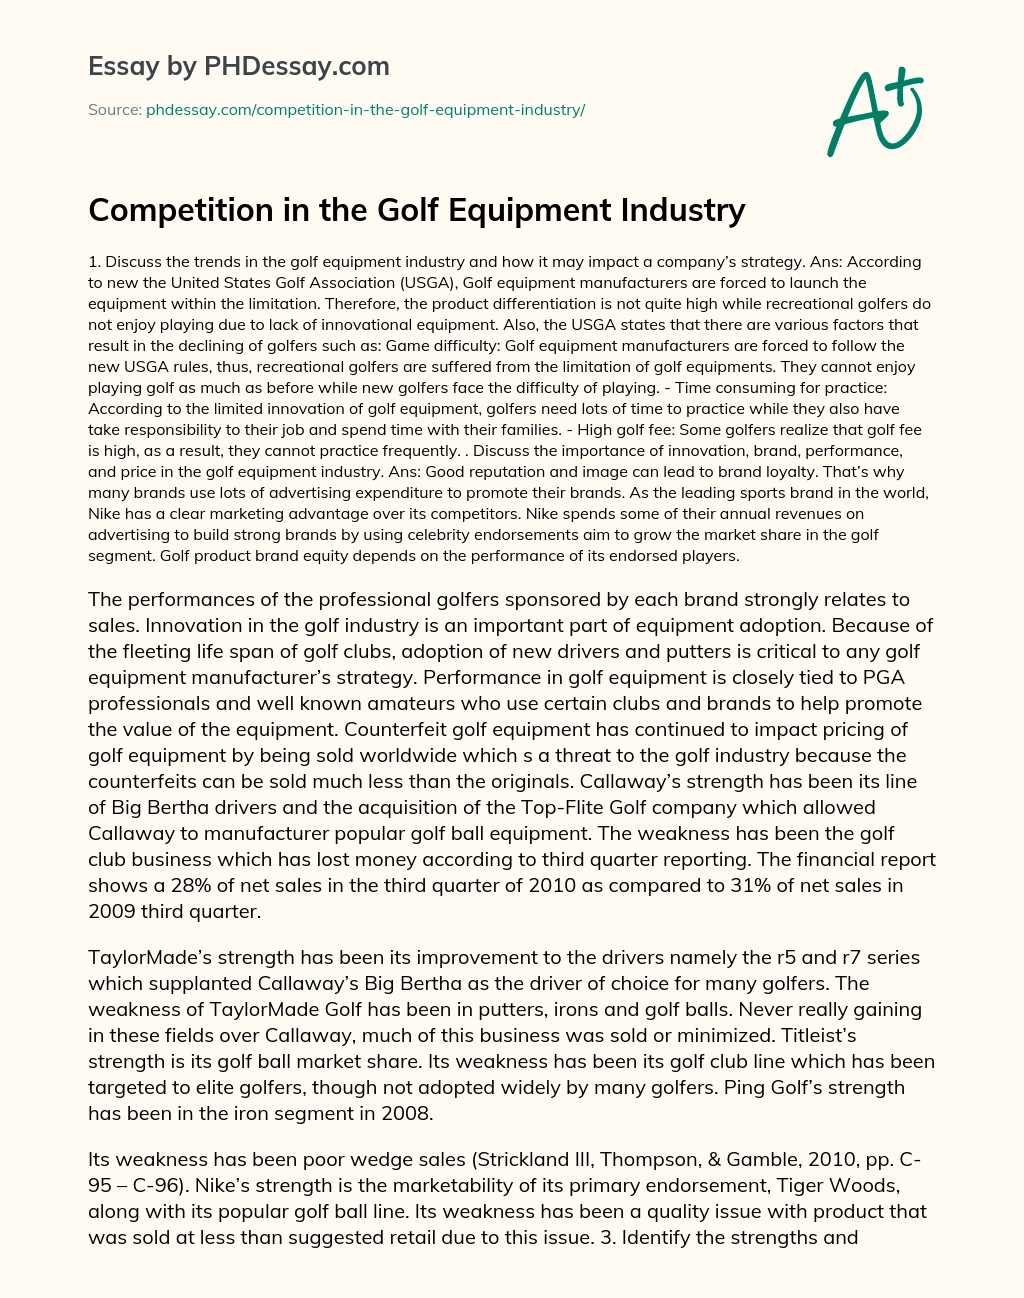 Competition in the Golf Equipment Industry essay